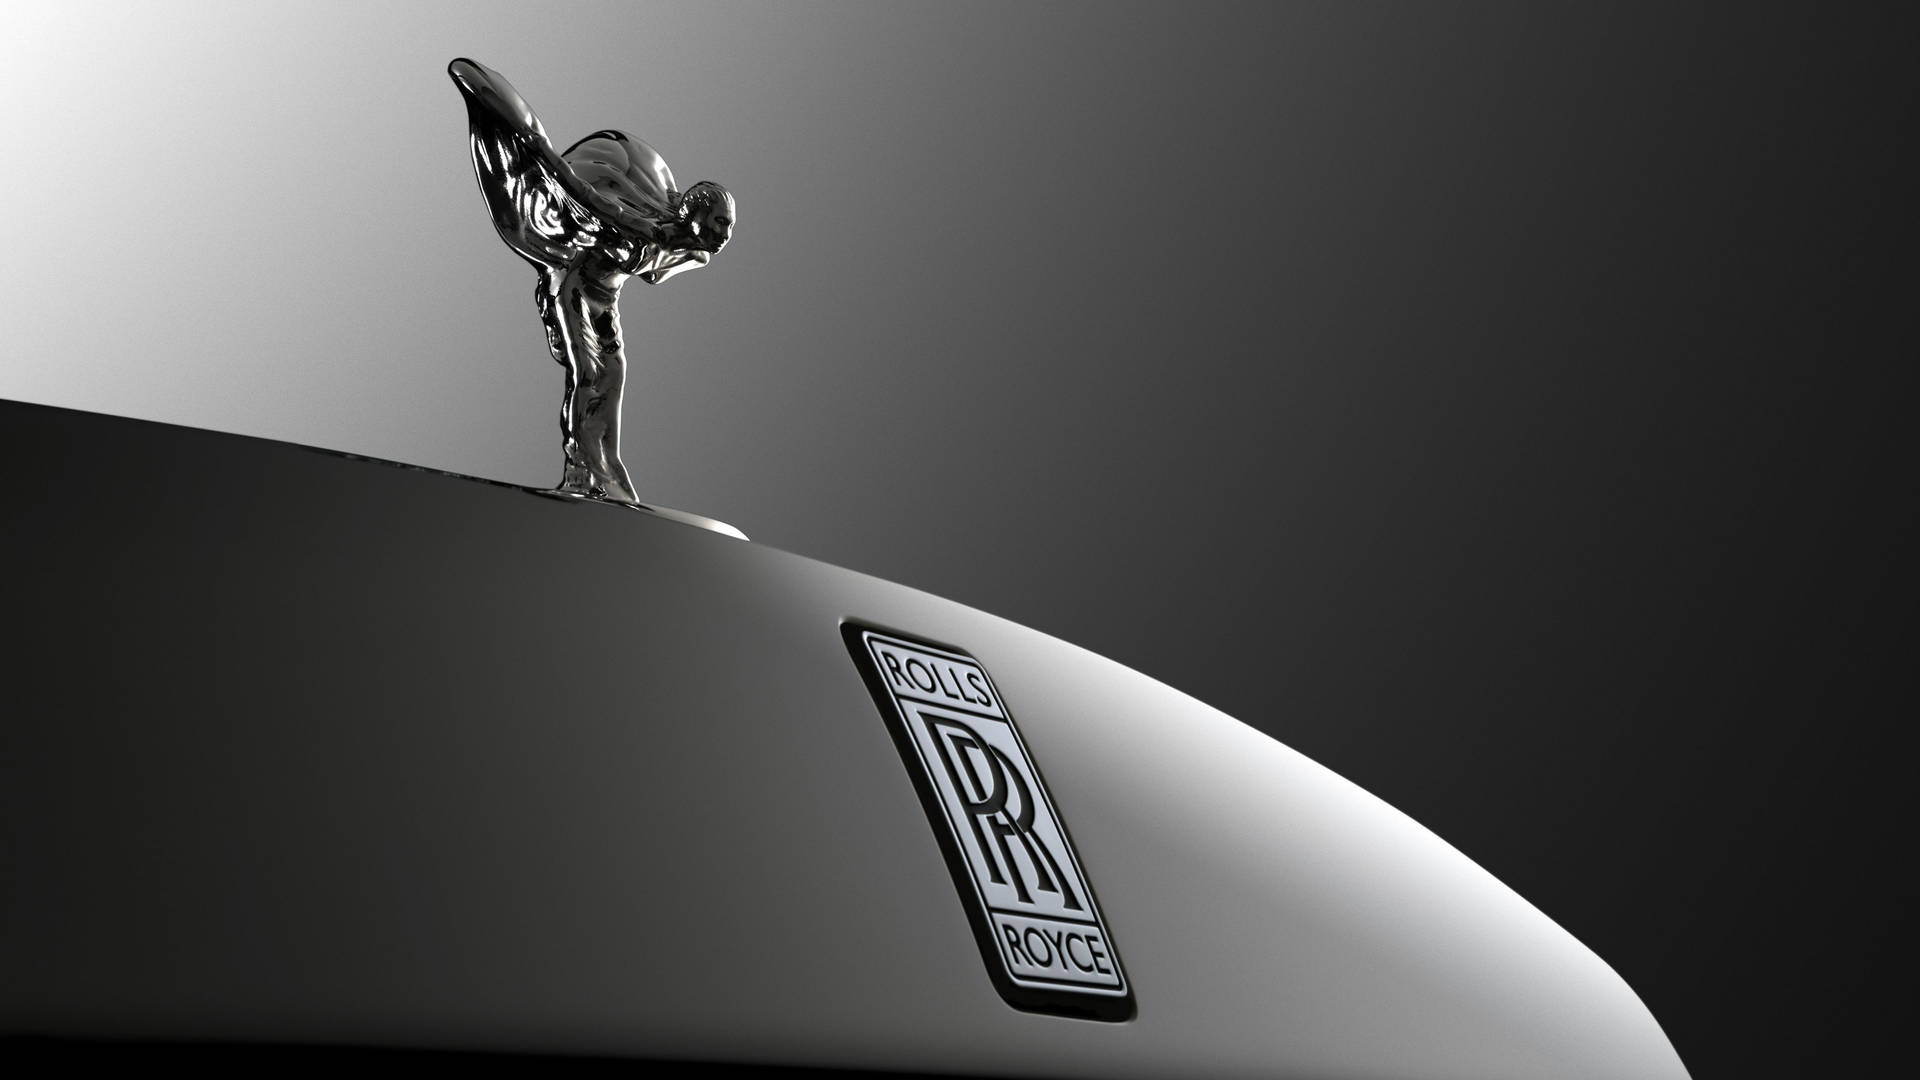 4096X2304 Rolls Royce Wallpaper and Background